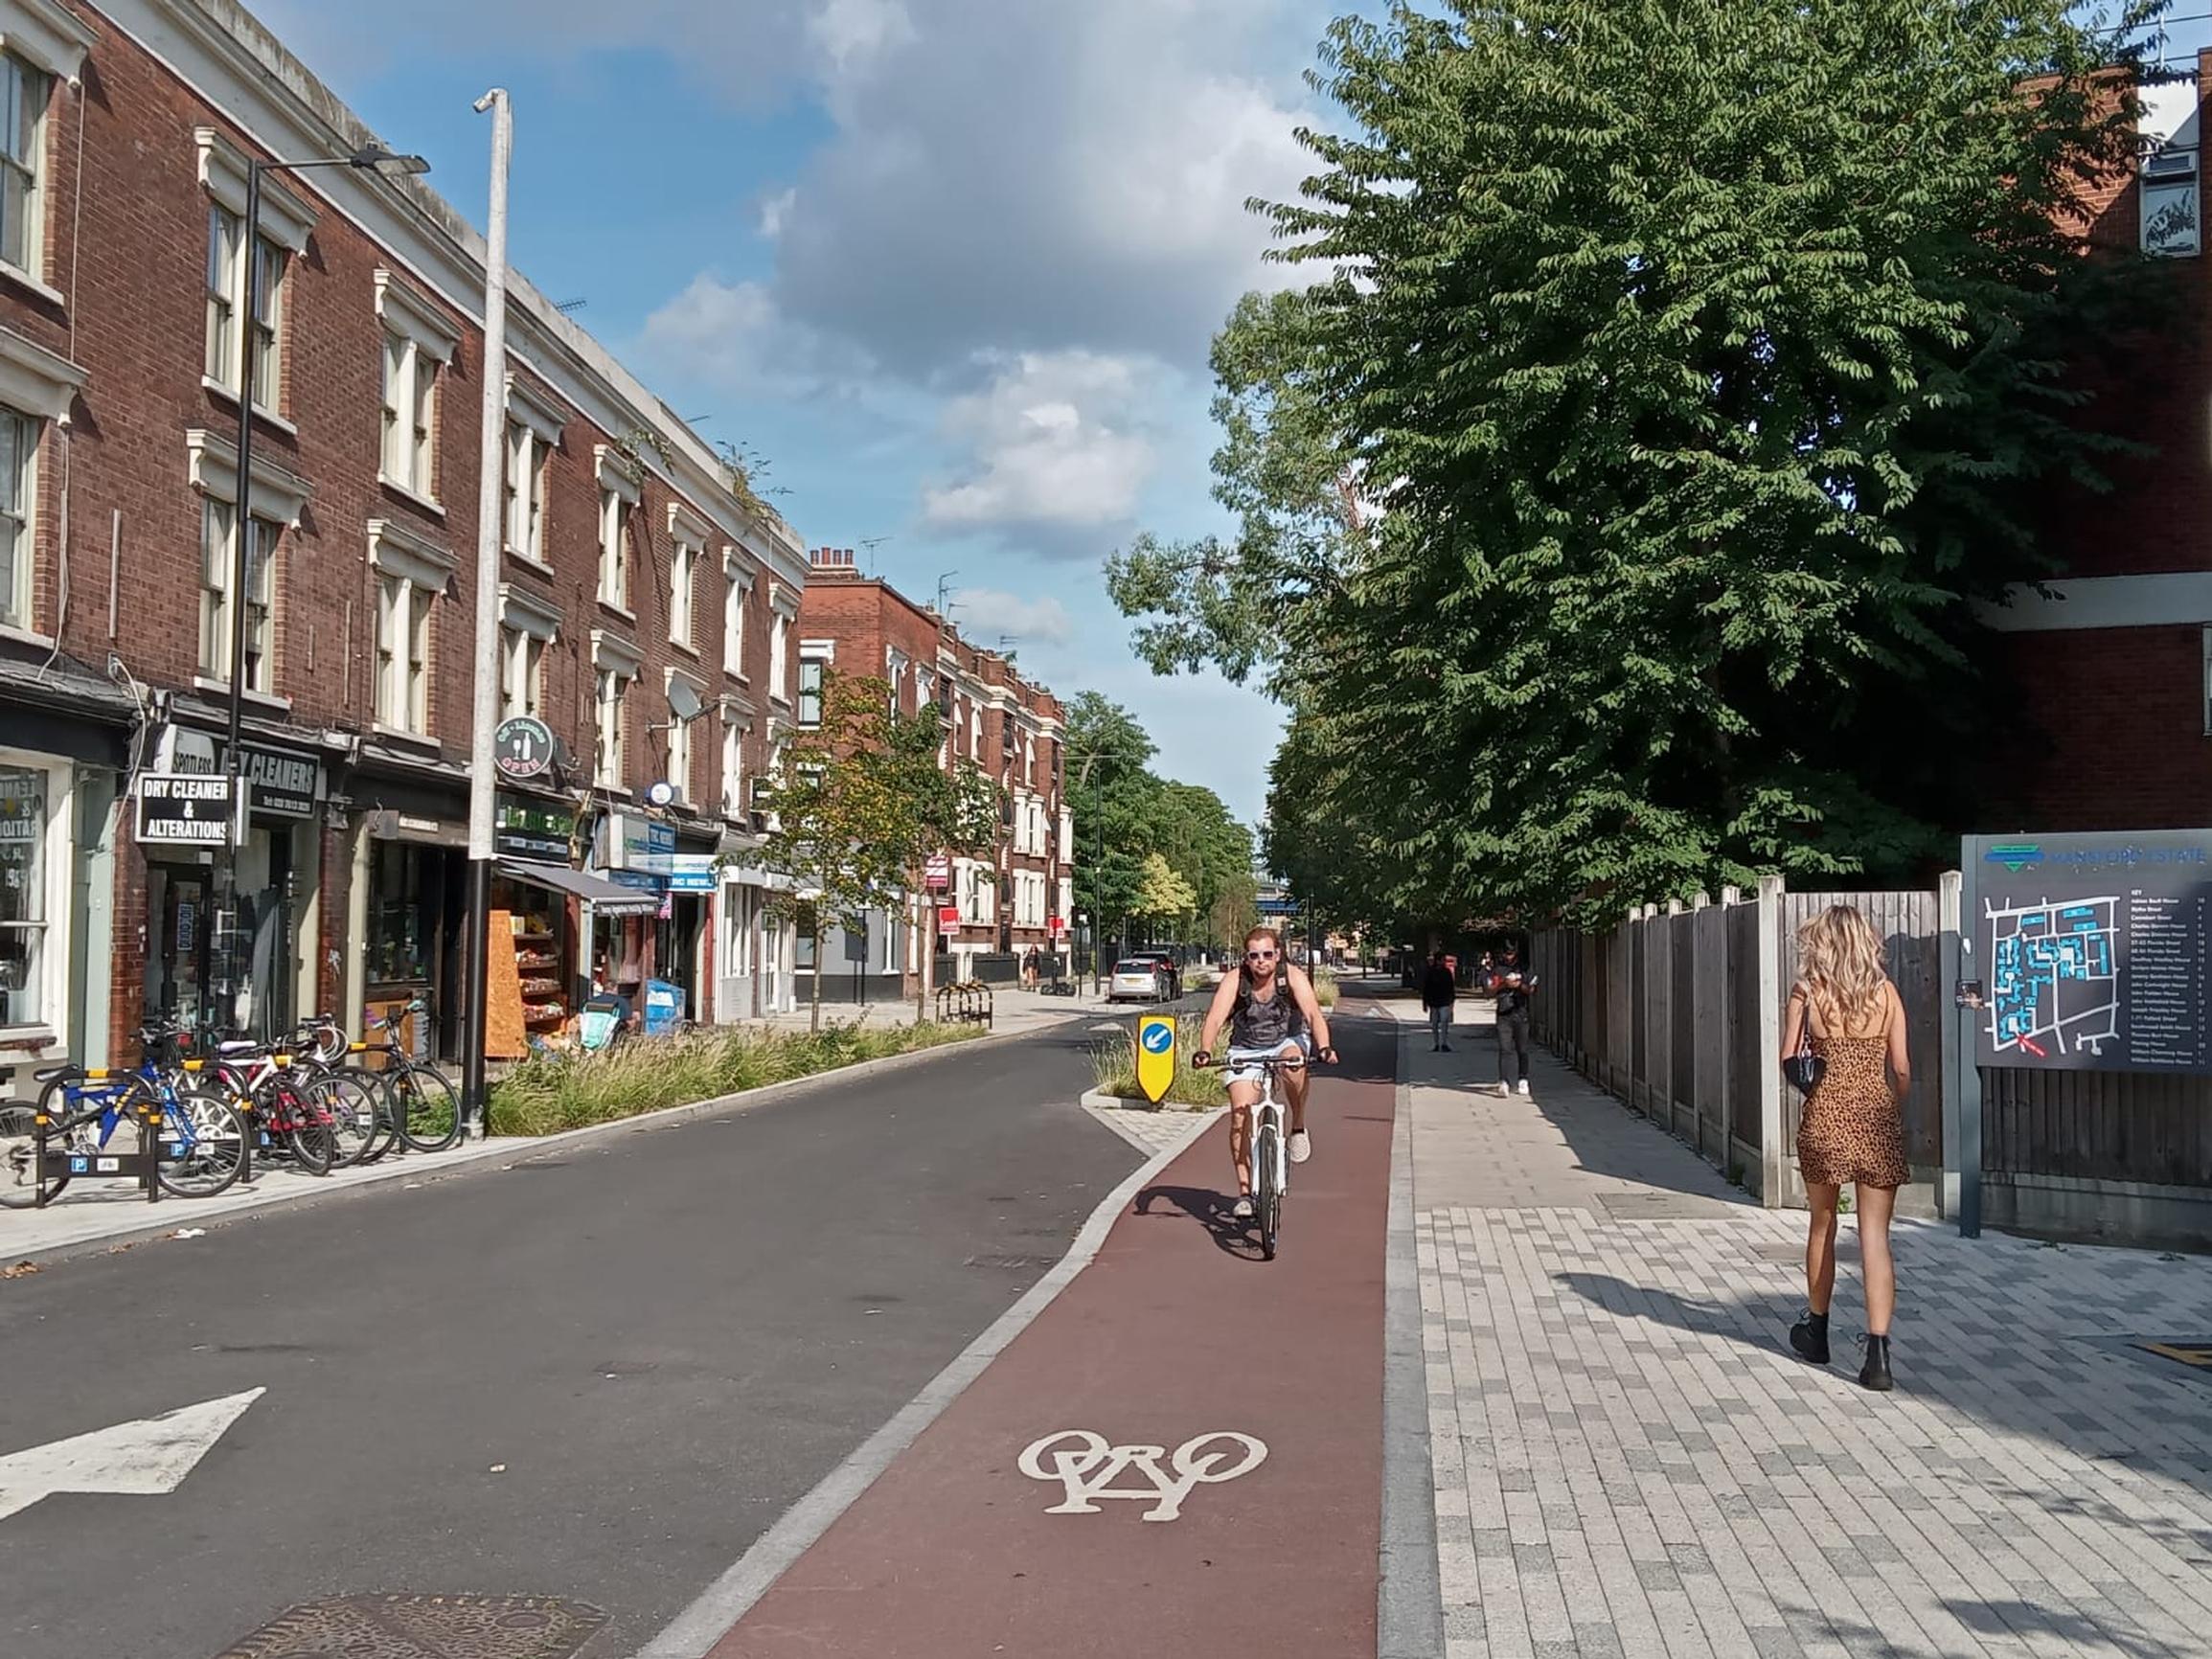 LTN schemes such as Old Bethnal Green Road set to be removed by Tower Hamlets Council